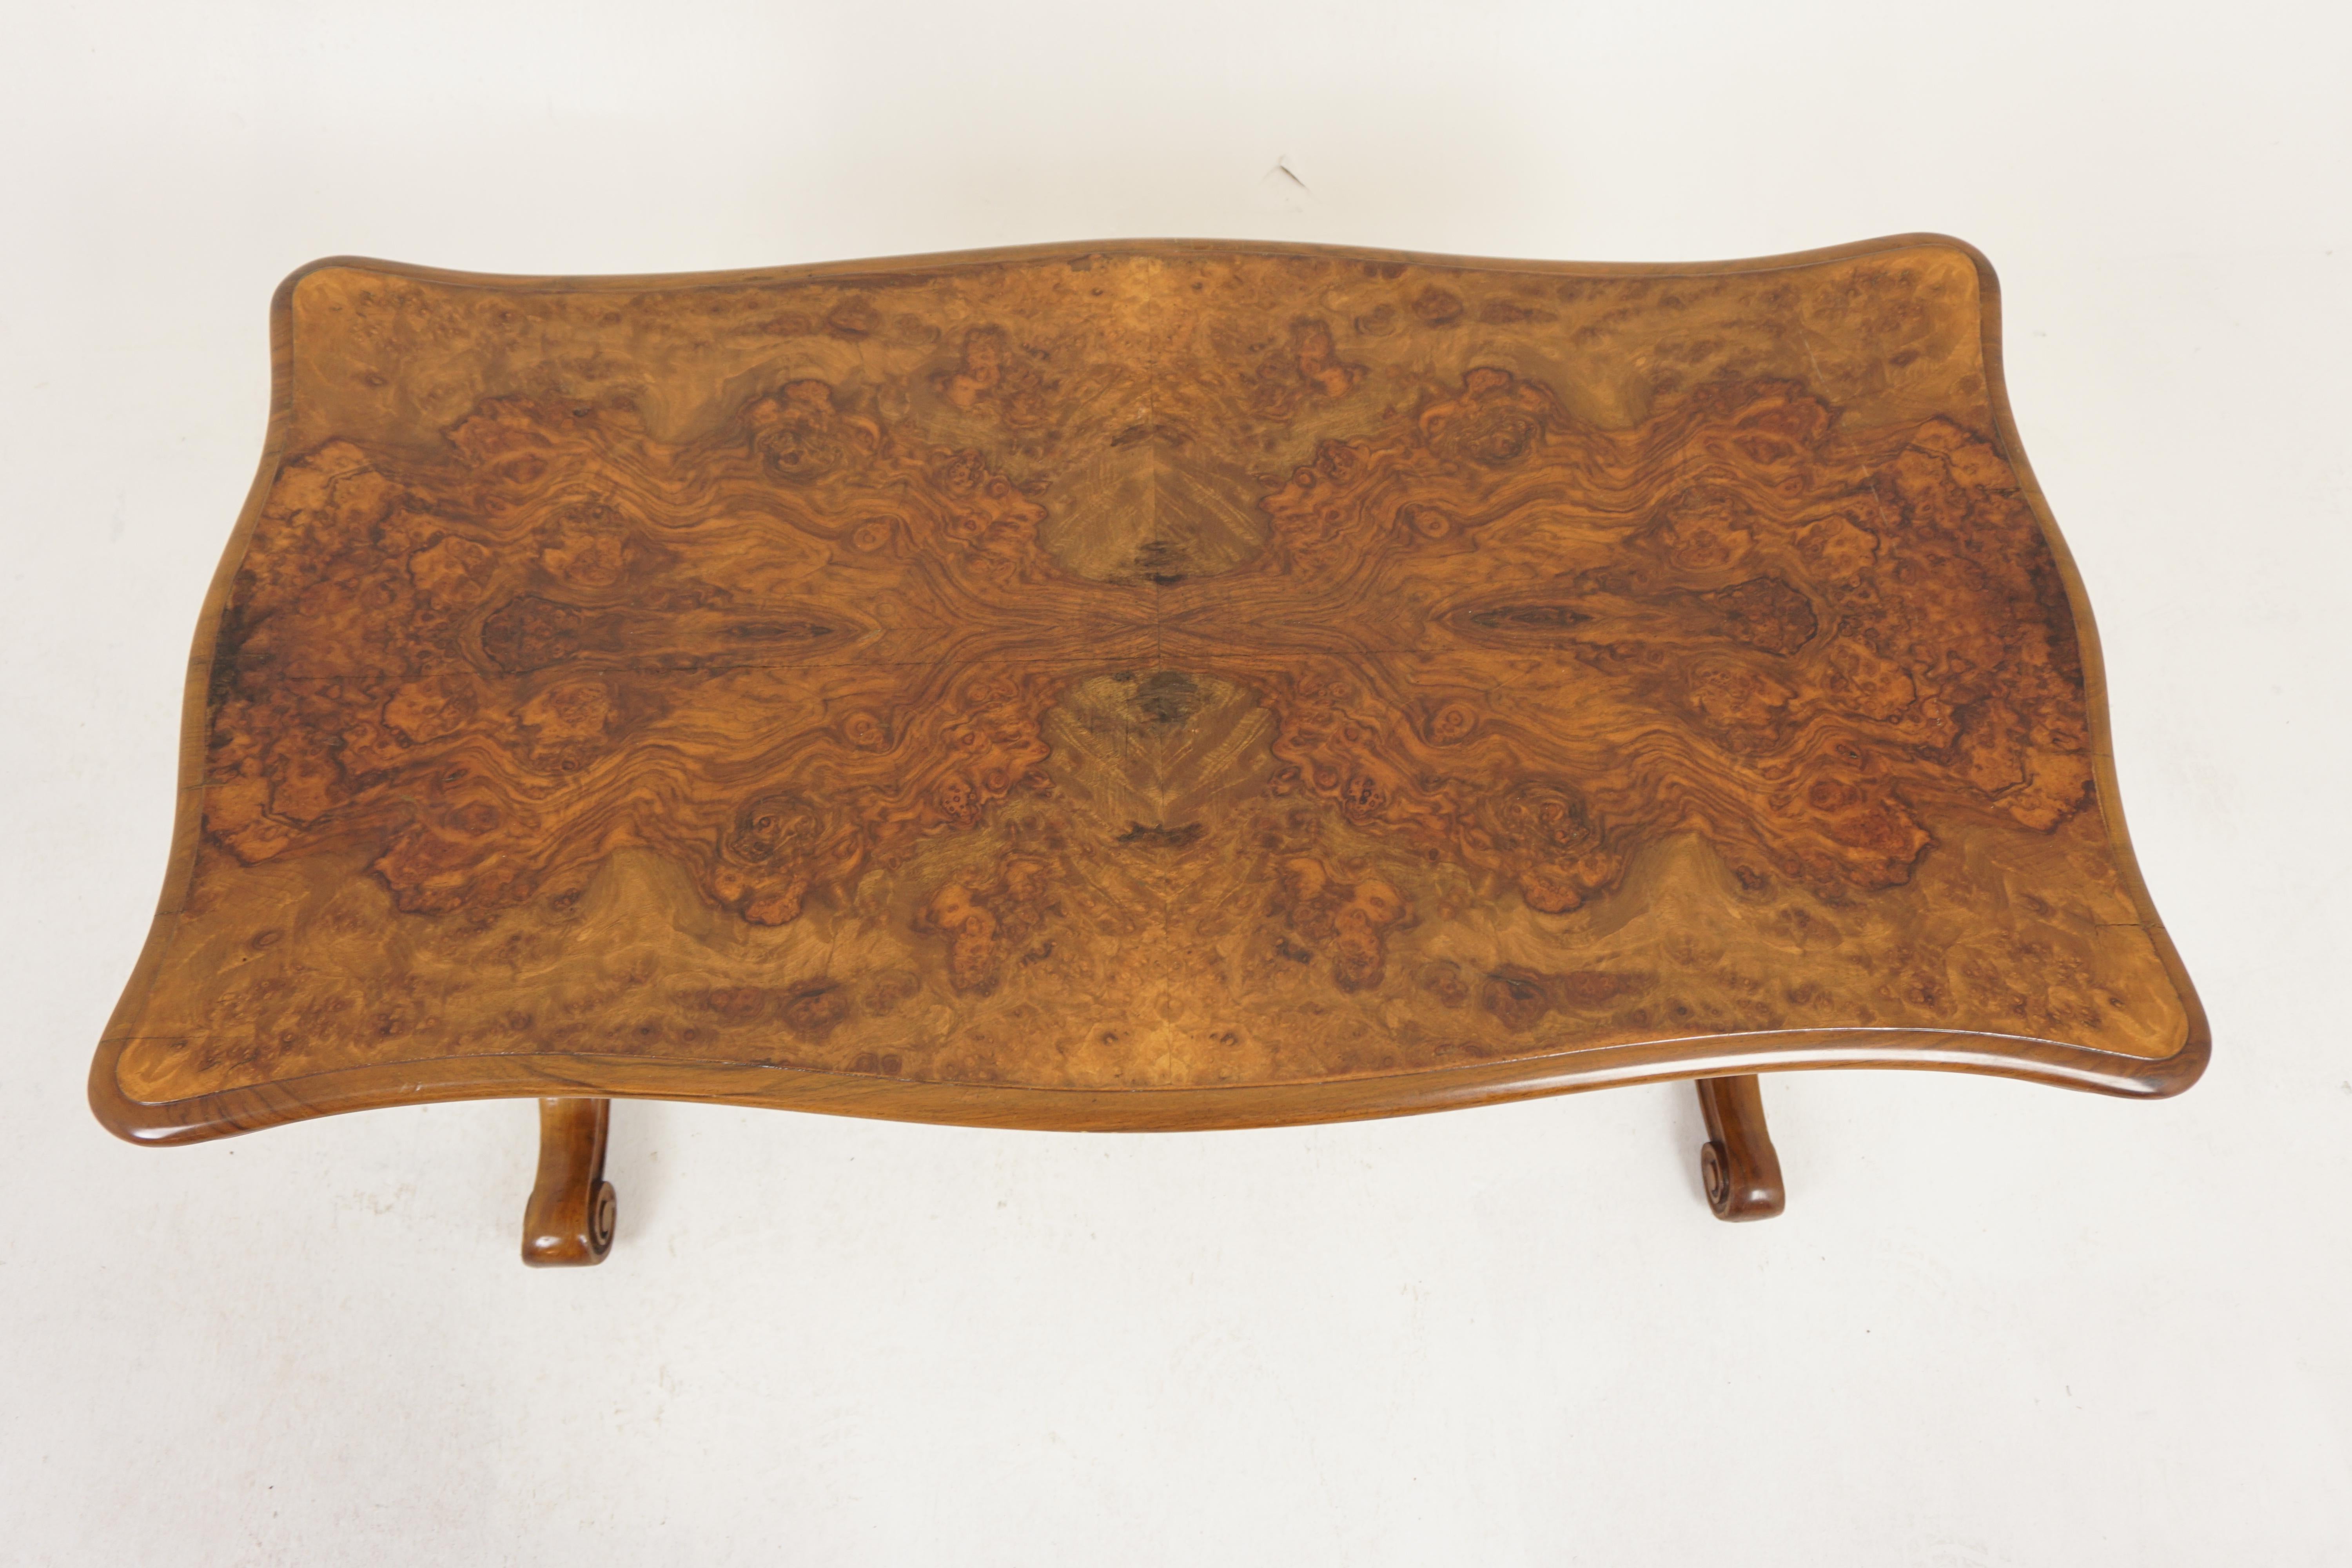 Hand-Crafted Antique Victorian Burr Walnut Coffee Table, Scotland 1870, H1188